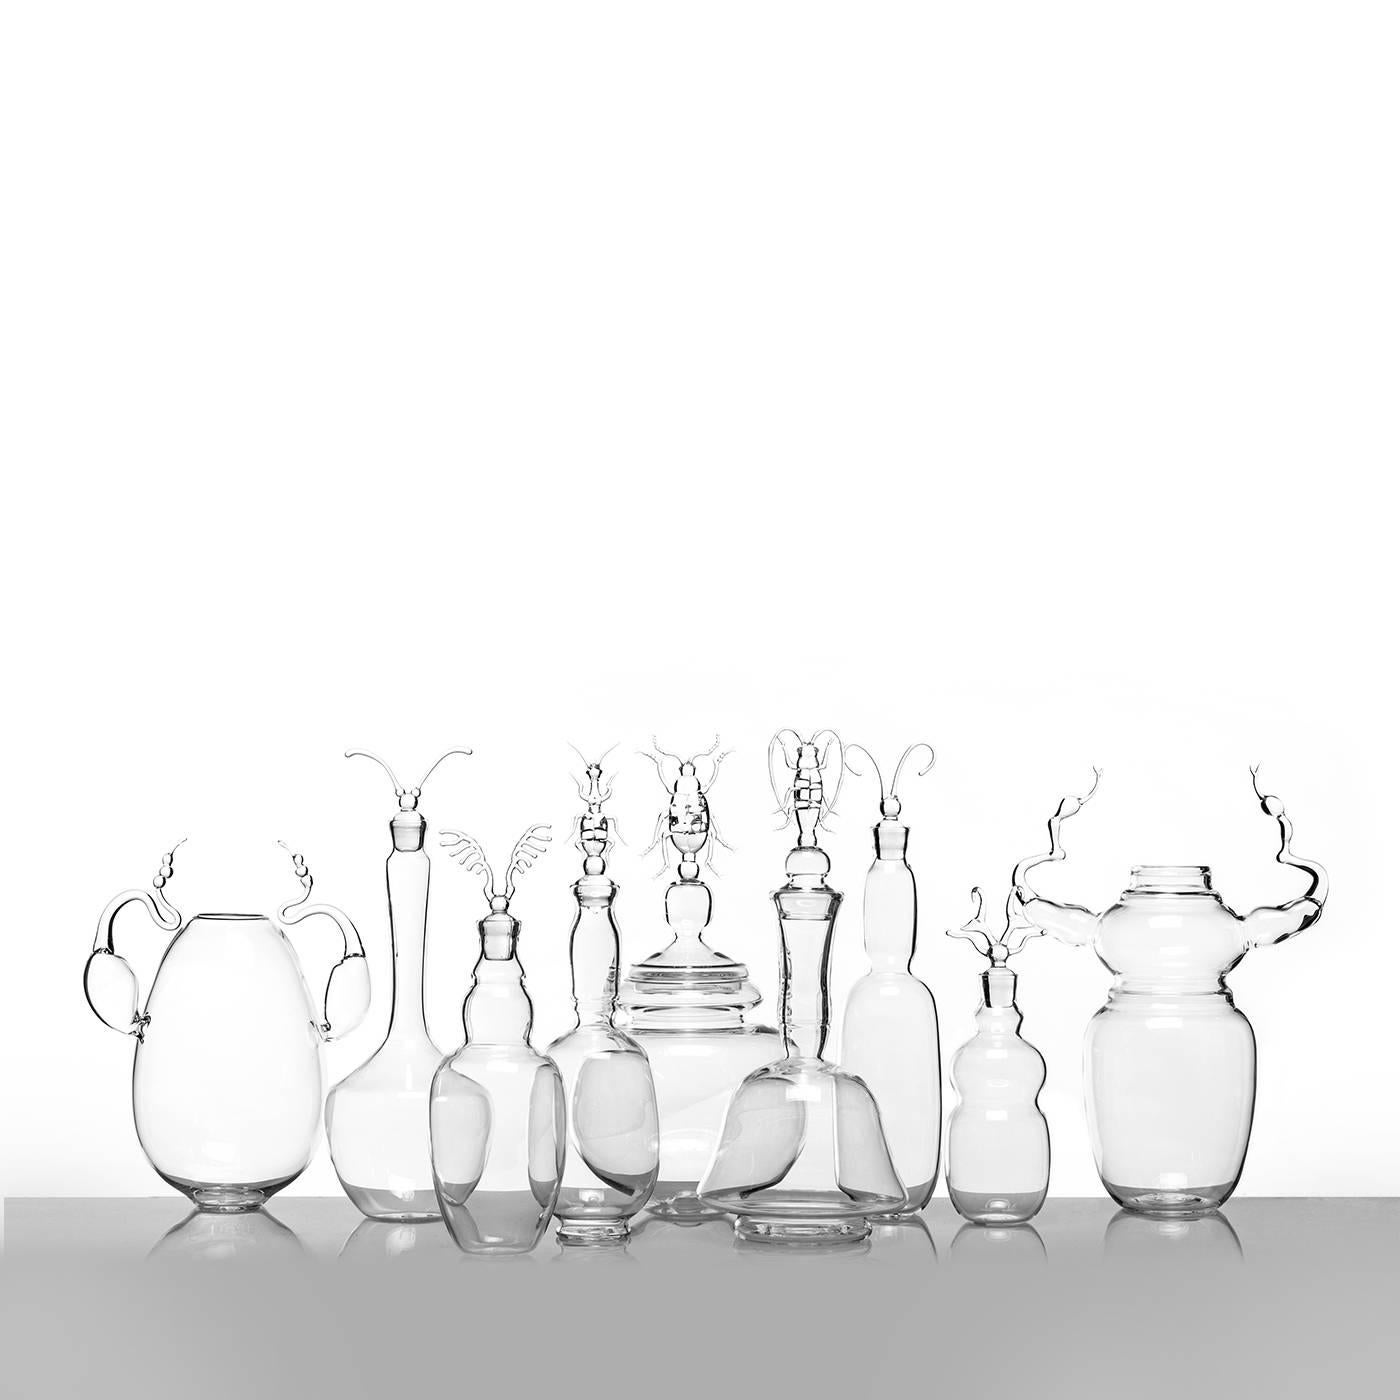 This exquisite decanter was entirely mouth-blown and handmade of borosilicate glass and is part of a limited edition of only 29 pieces. Its sinuous shape, resting on a small plinth base, is inspired by the Silhouette of a specific beetle, the